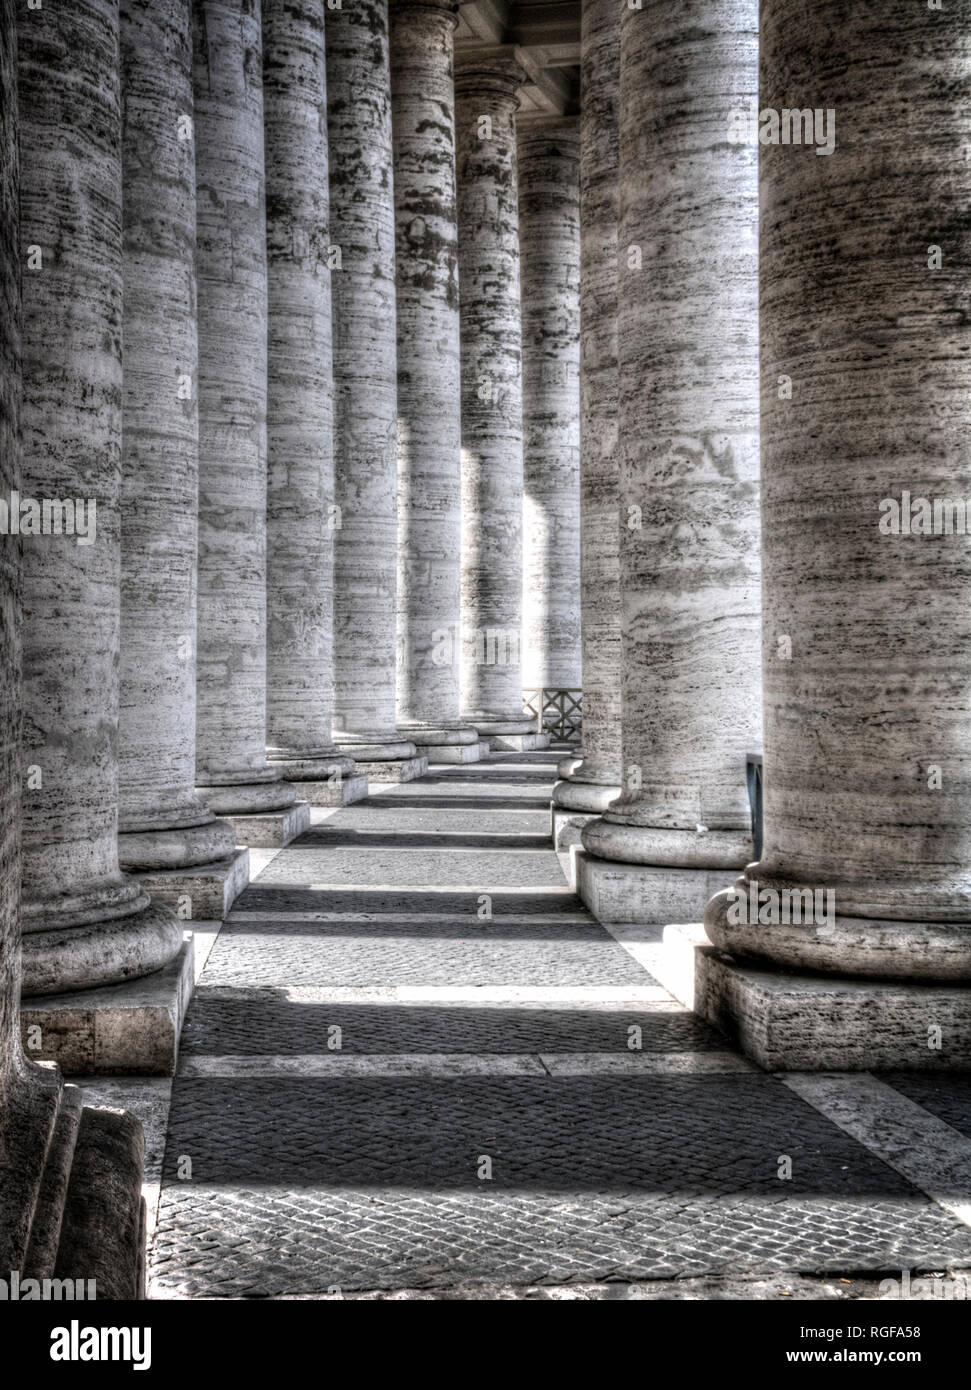 Vatican City, Rome. Part of the colonnade surrounding the Basilica of St. Peter. Stock Photo